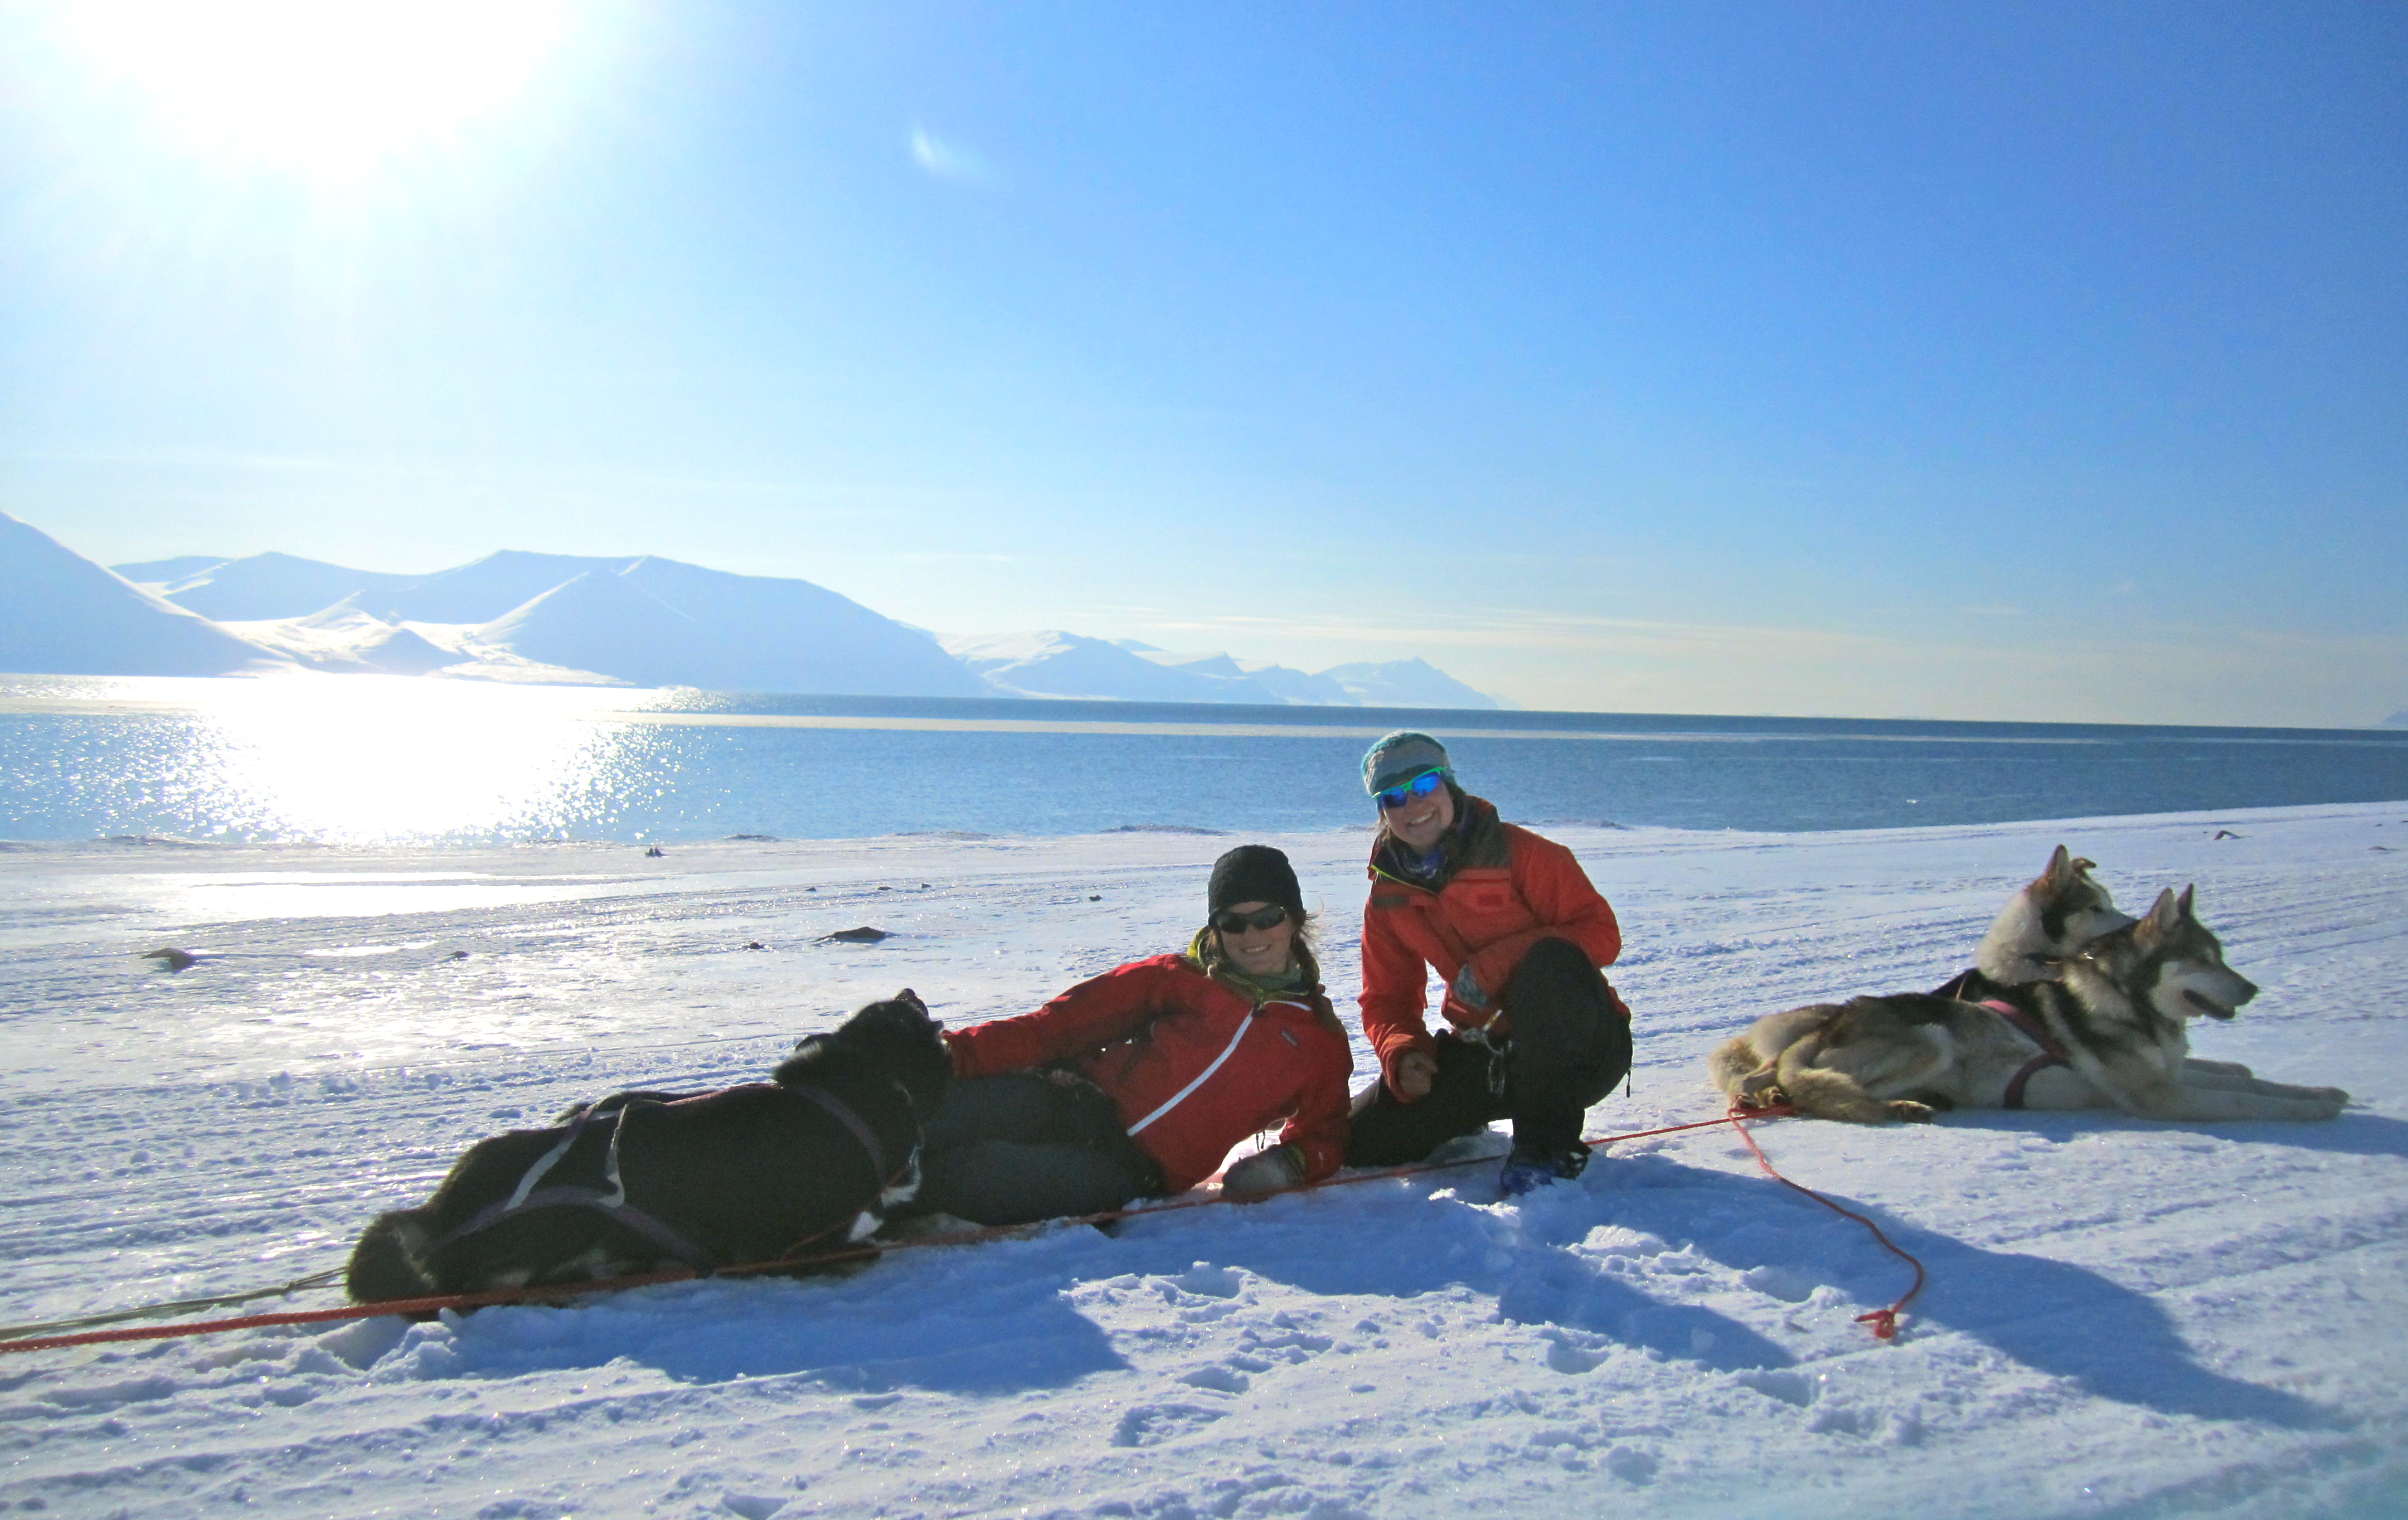 Researchers laying in snow in a remote area of Alaska